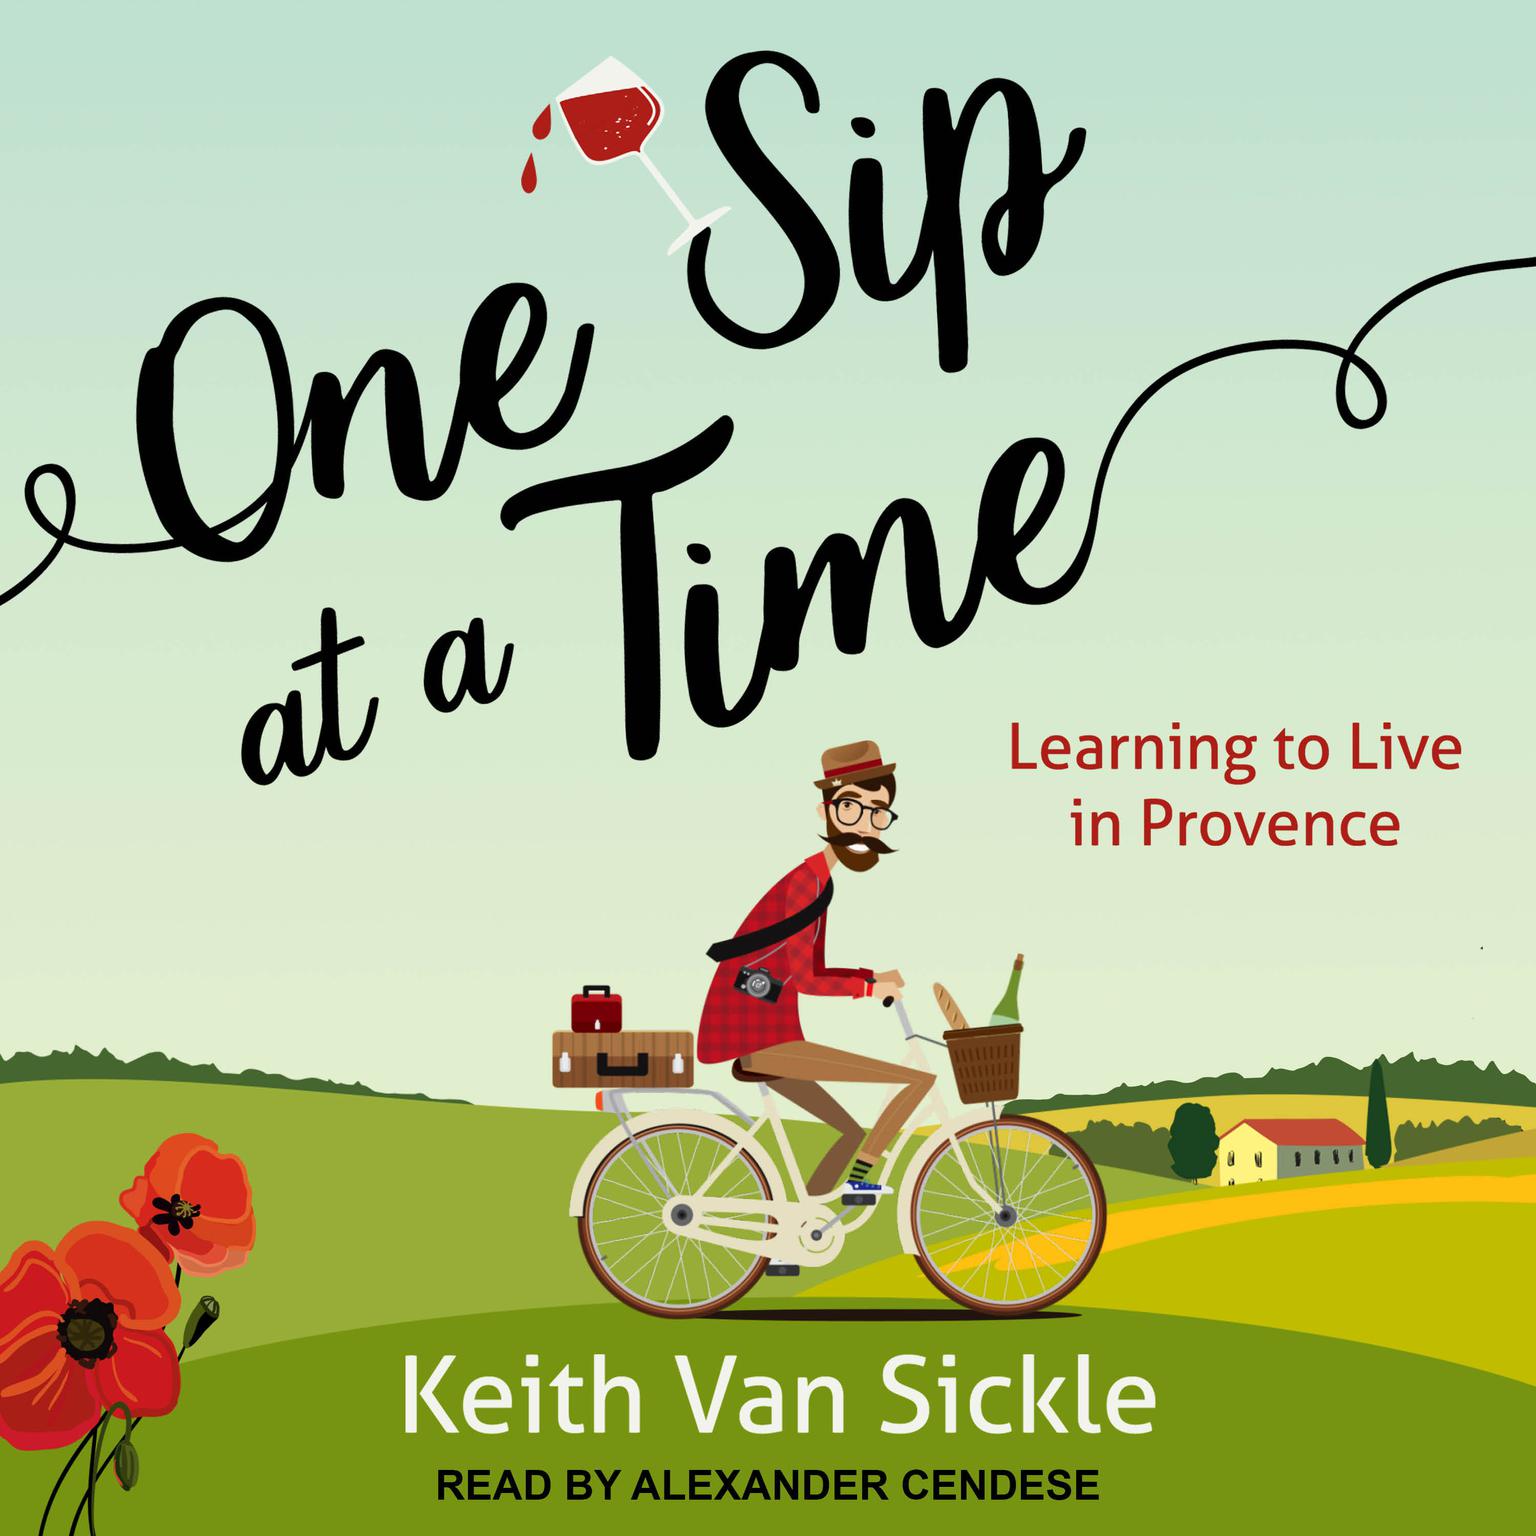 One Sip at a Time: Learning to Live in Provence Audiobook, by Keith Van Sickle